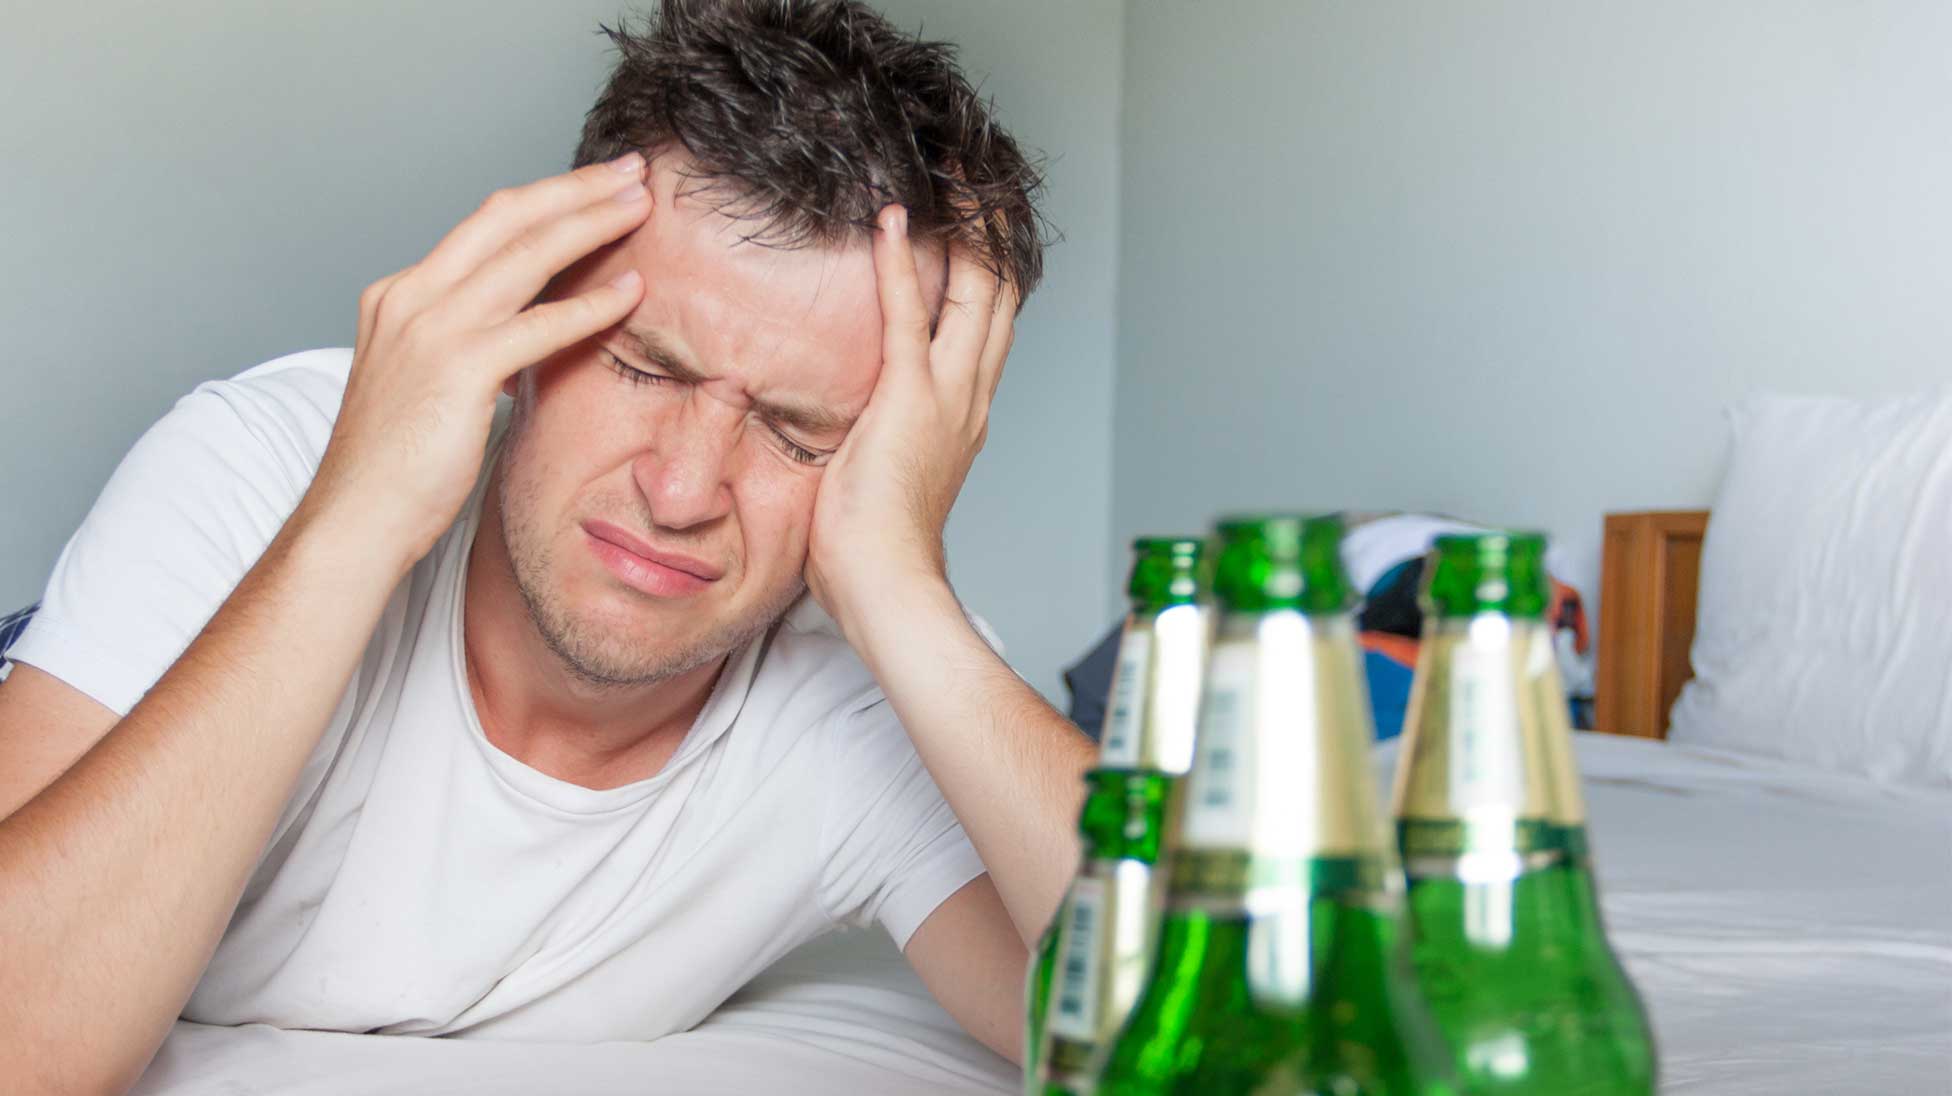 How Do Alcoholics Deal With Hangovers?